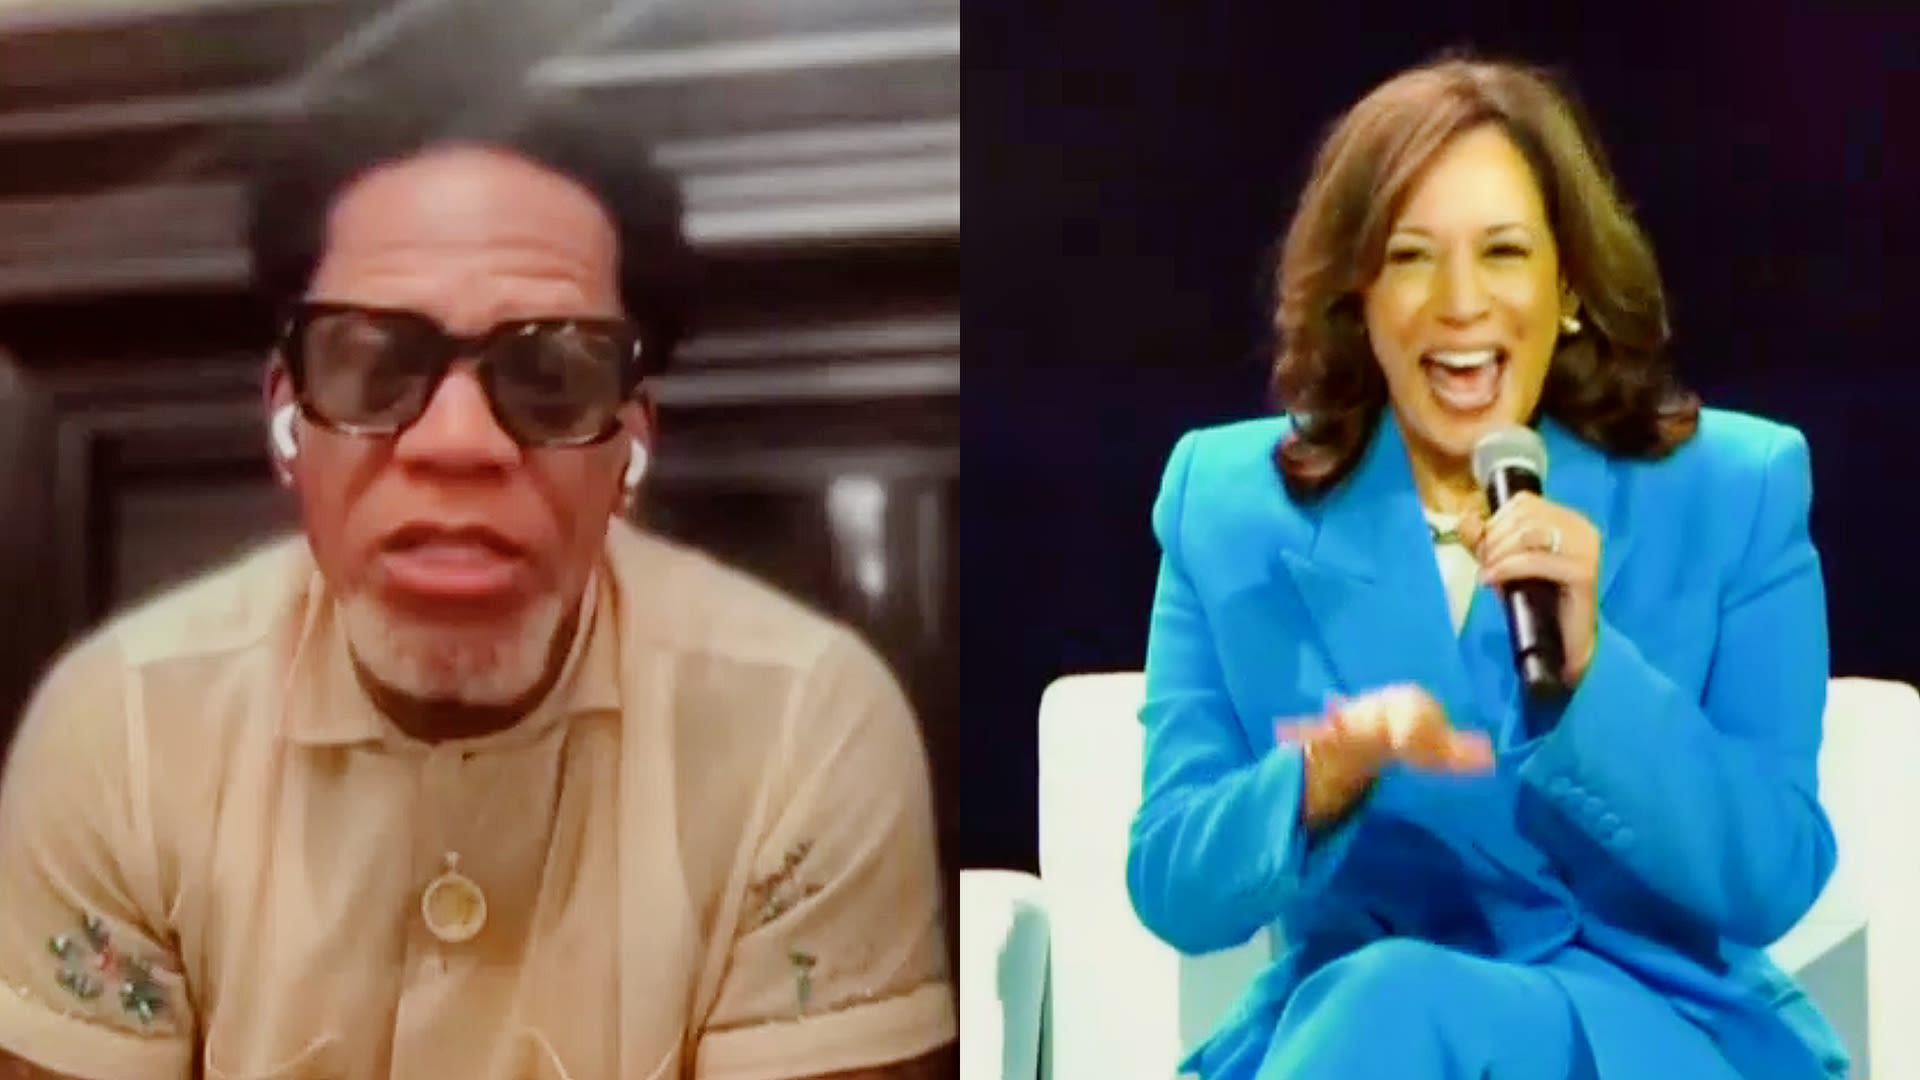 DL Hughley Gives Blistering Response To Ex-Trump Aide Who Called Kamala Harris ‘Colored DEI Hire’